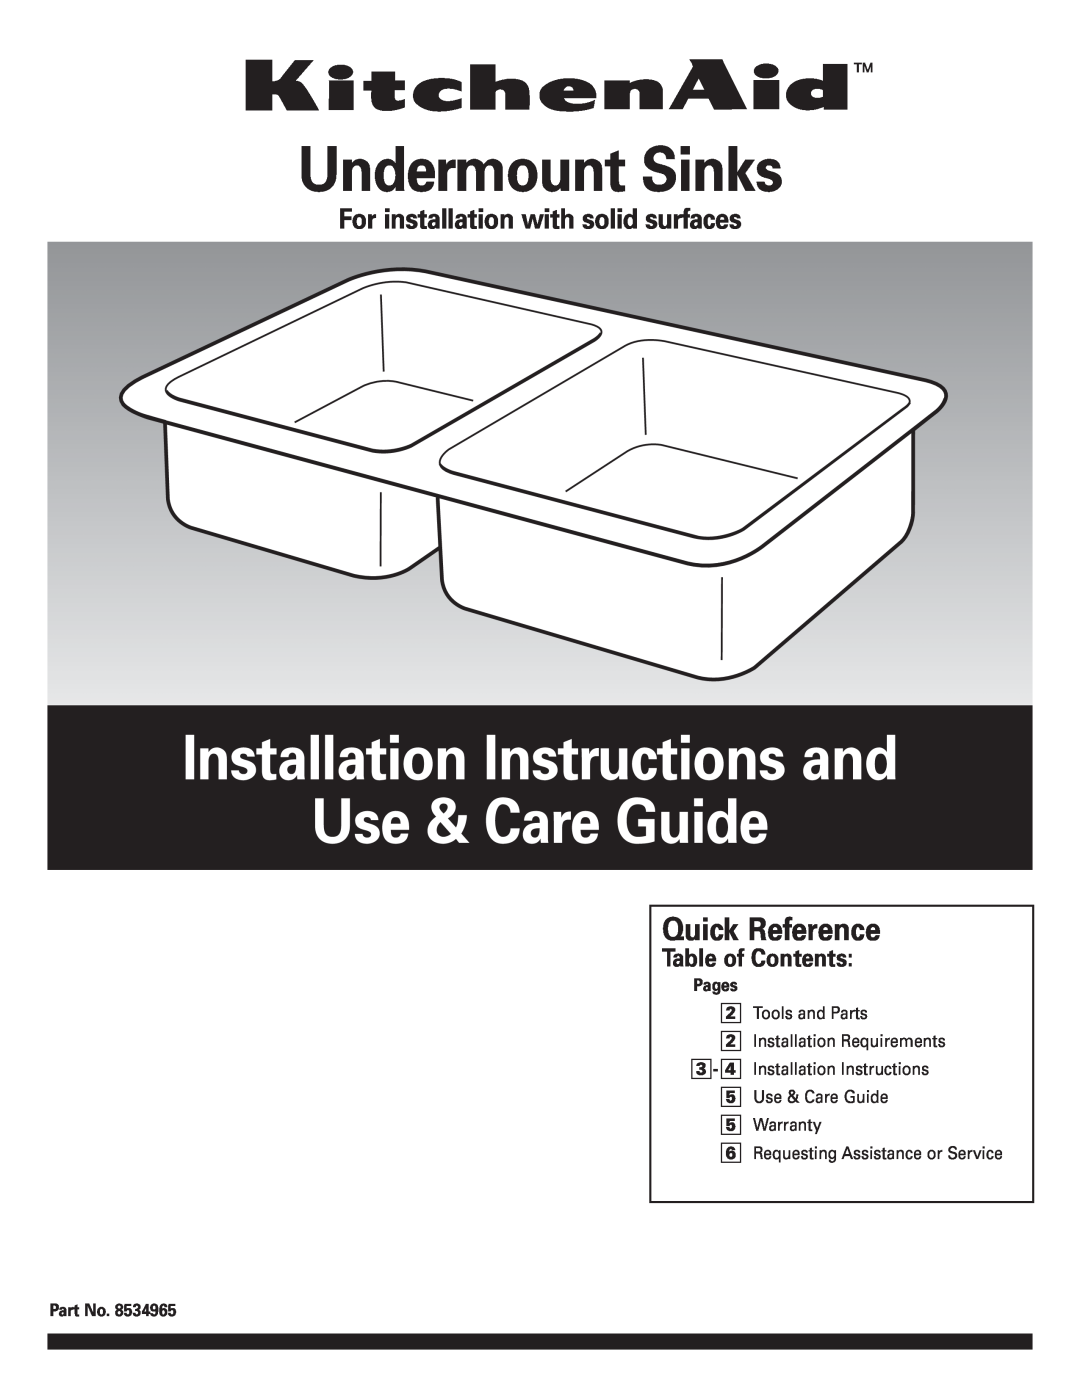 KitchenAid undermount Sinks installation instructions Undermount Sinks, Installation Instructions and Use & Care Guide 